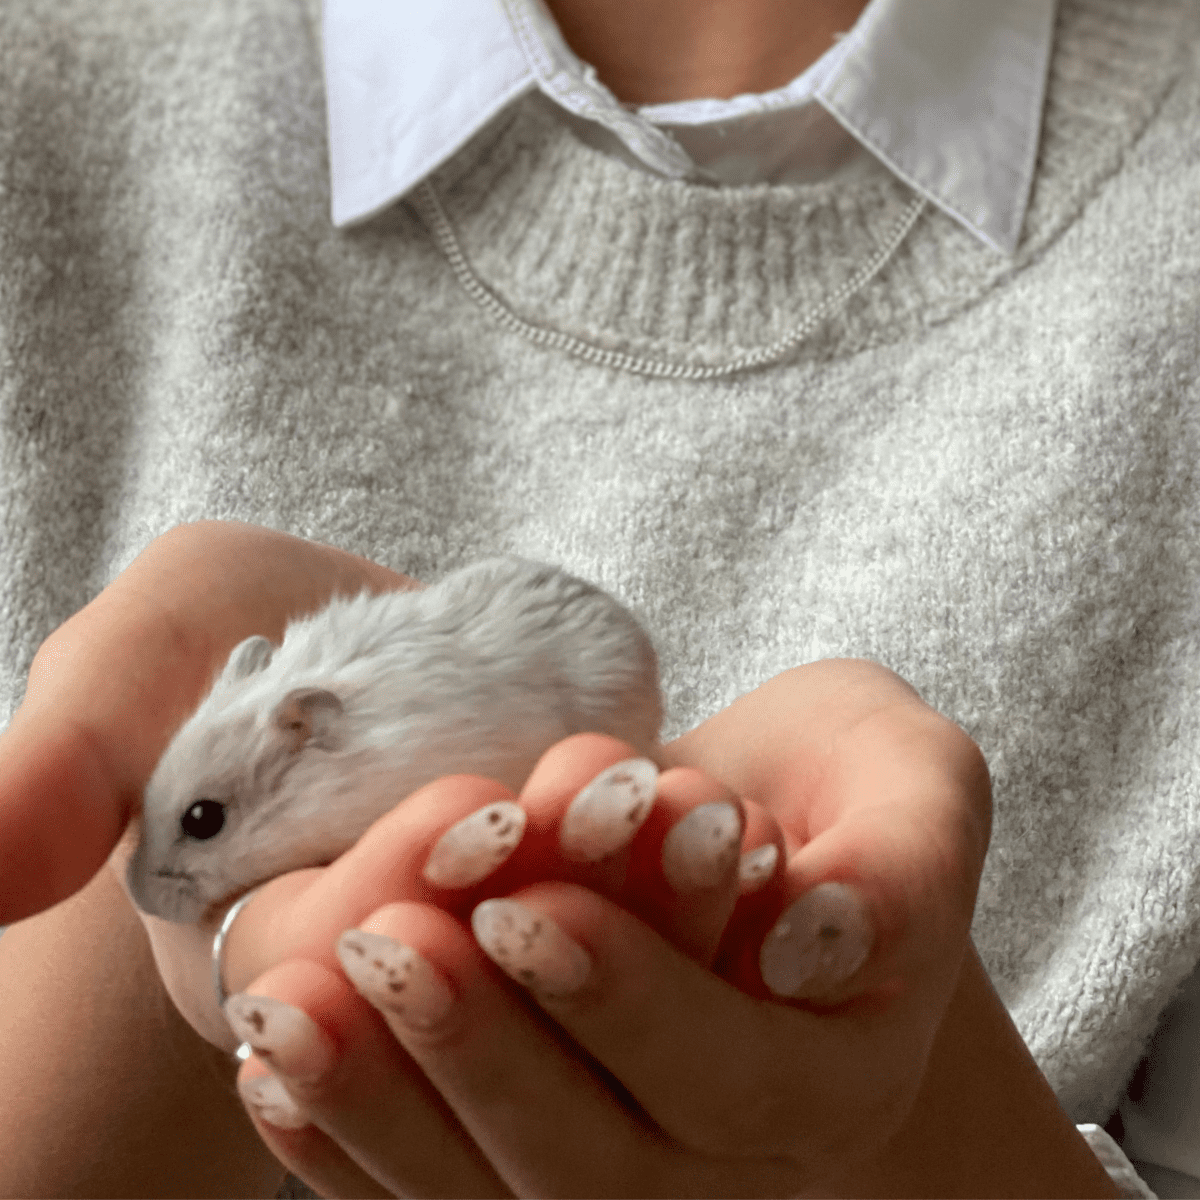 13 Signs Of Old Age In Hamsters, And How To Care For Them